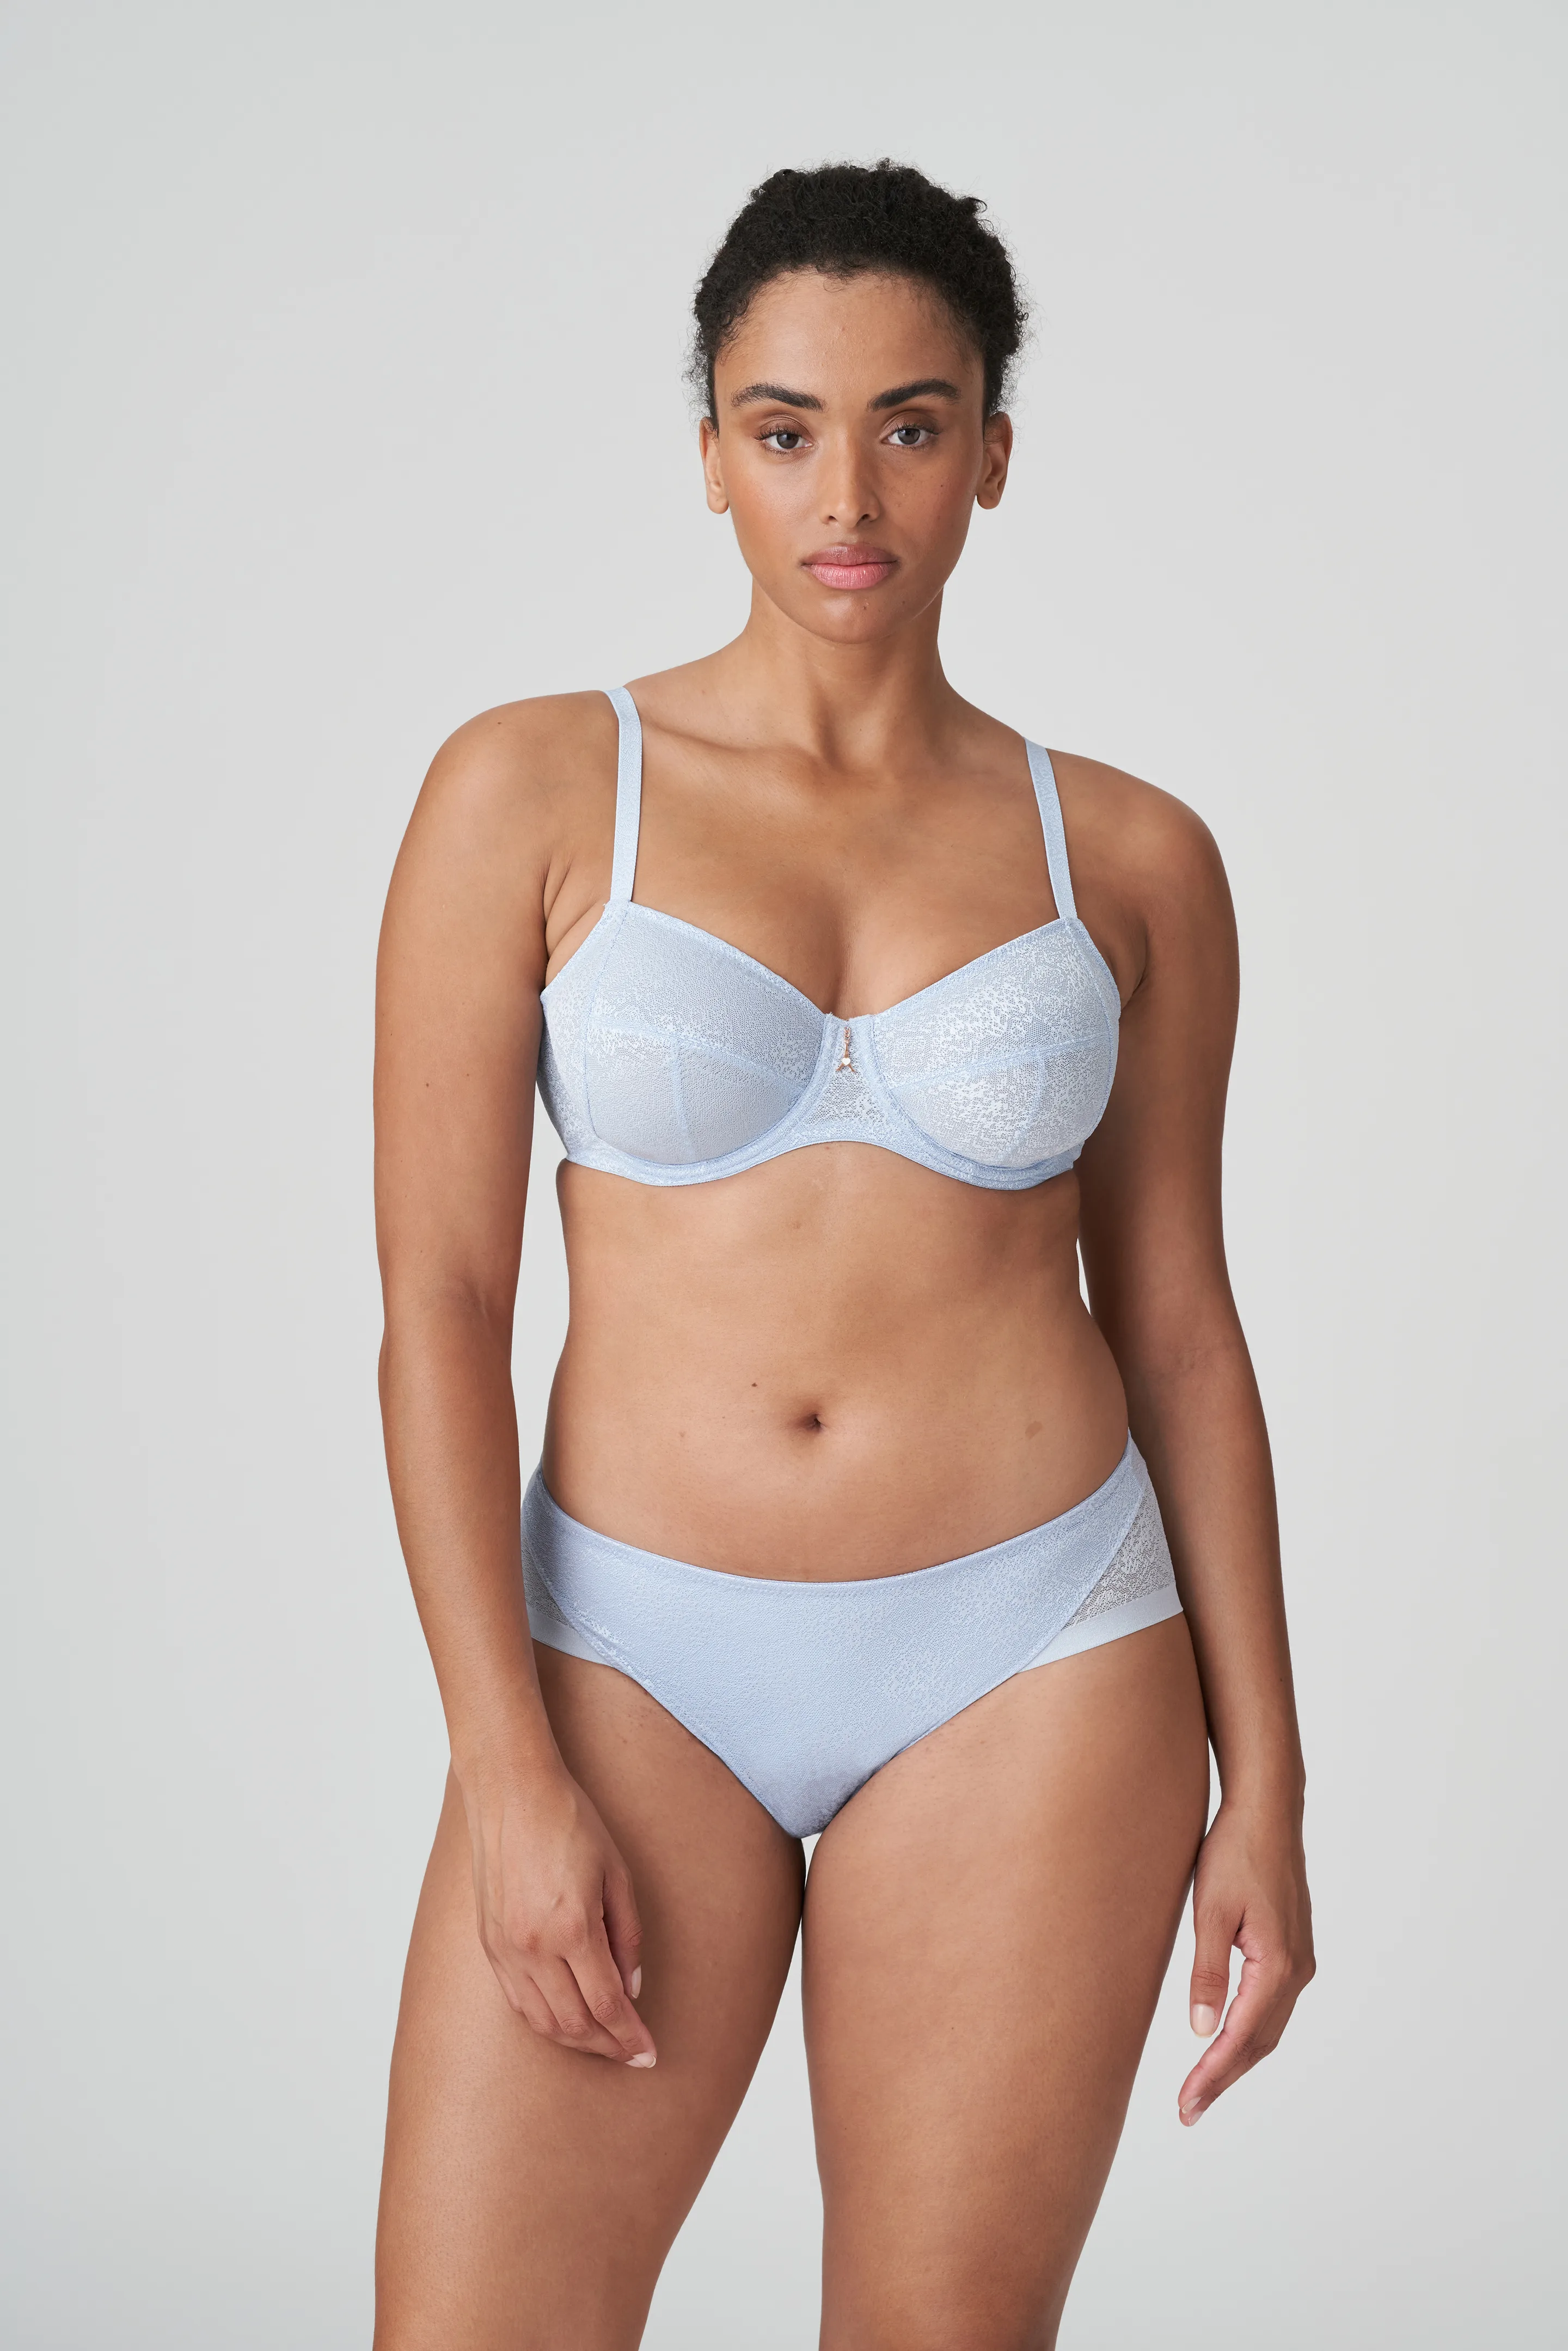 PRIMADONNA - FREE EXPRESS SHIPPING -Deauville Full Cup Bra- Silky